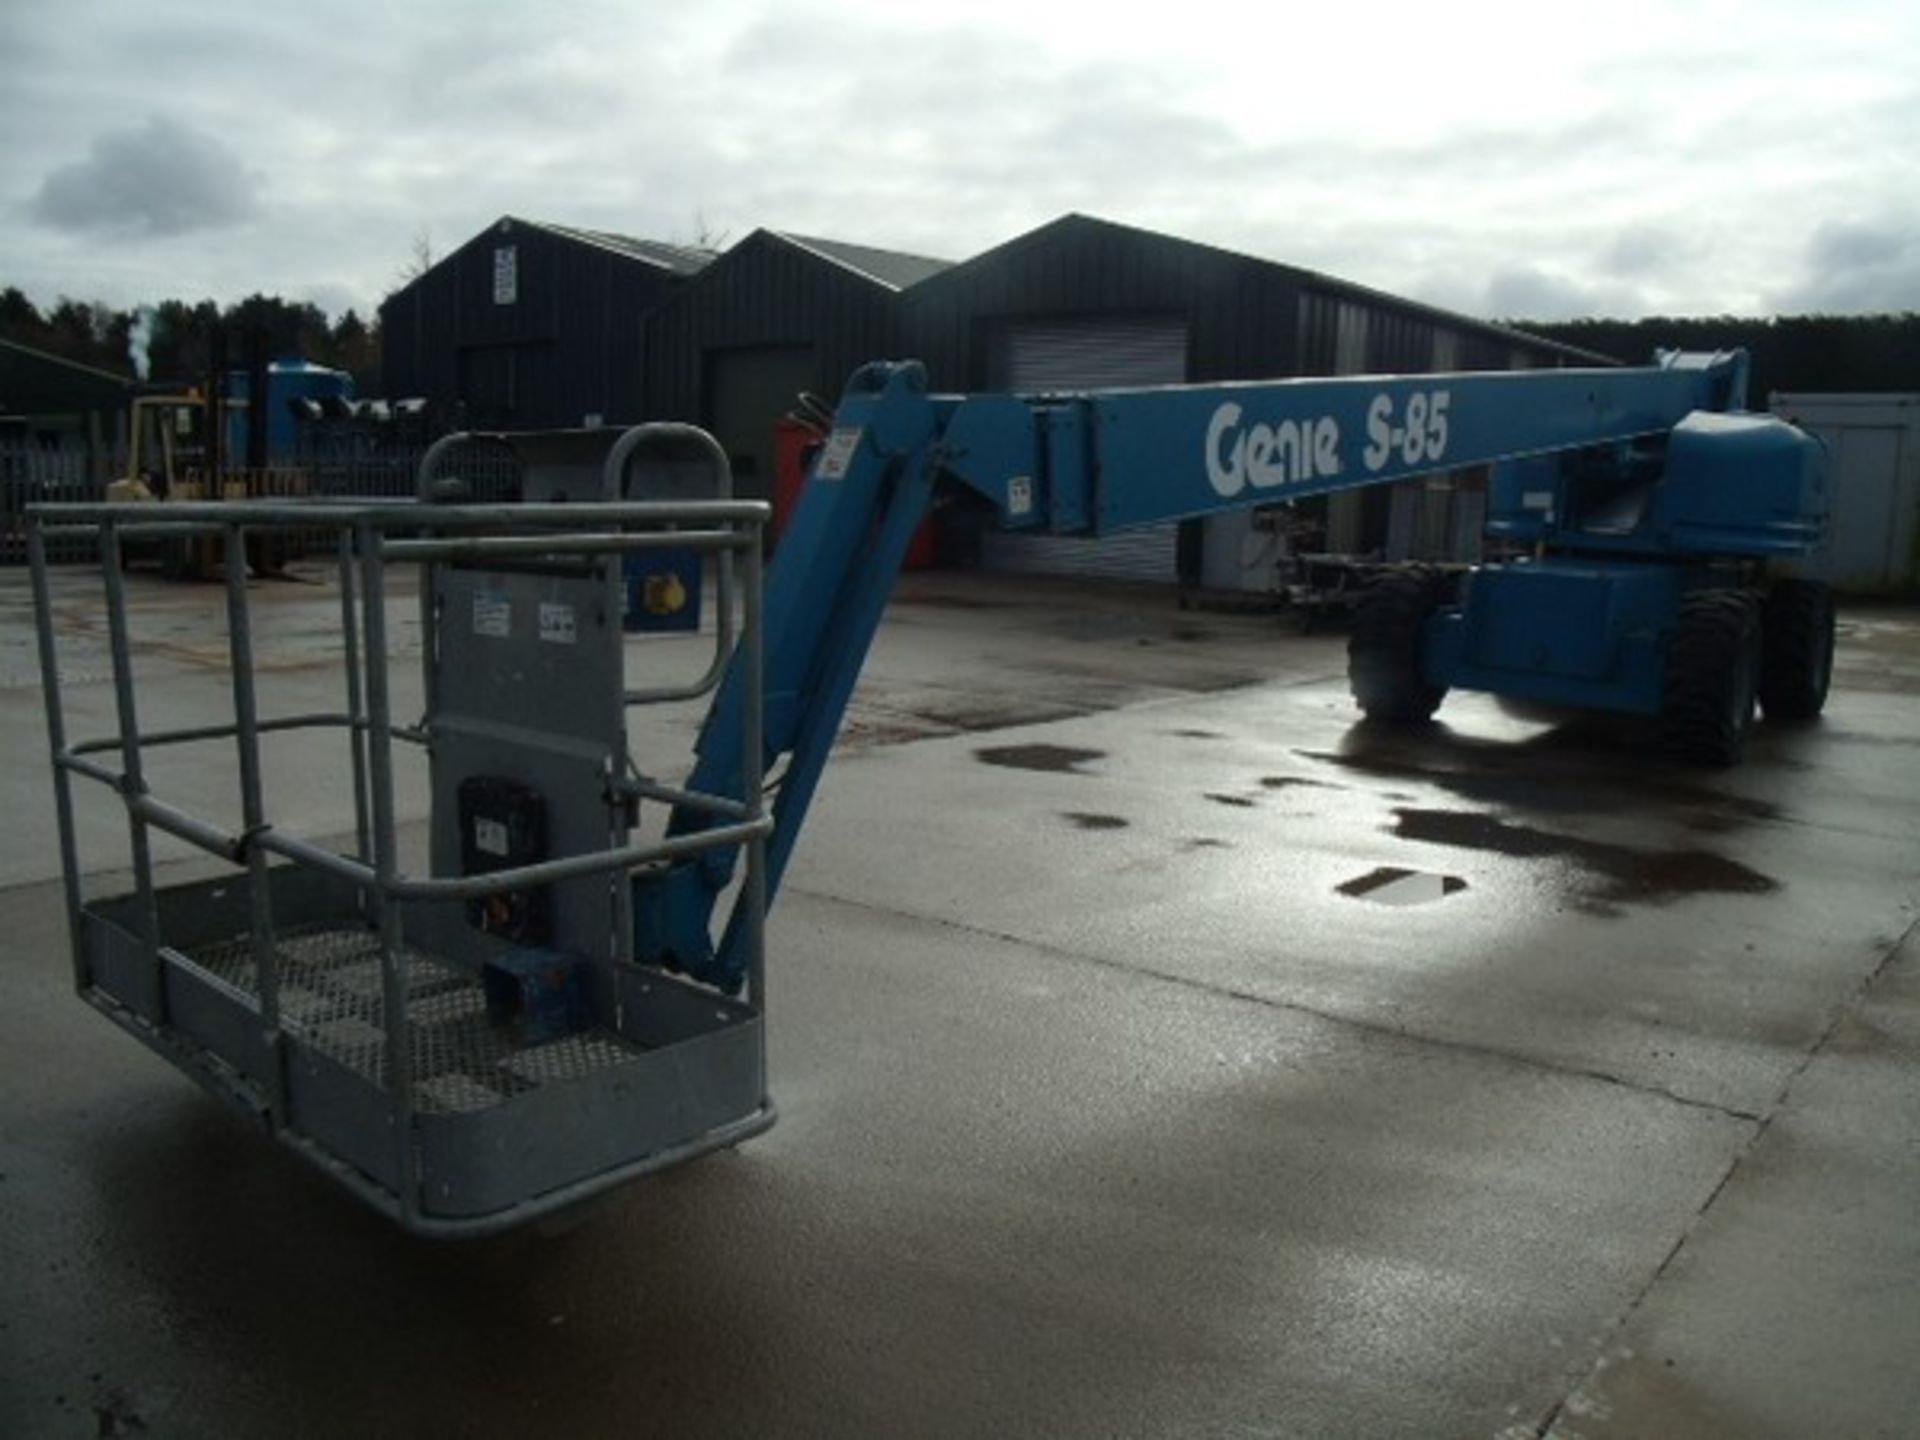 1999 GENIE 4X4 S85, s/n -1256, 5795hrs (verified), new alternator fitted 4 months ago, solid tyres. - Image 10 of 11